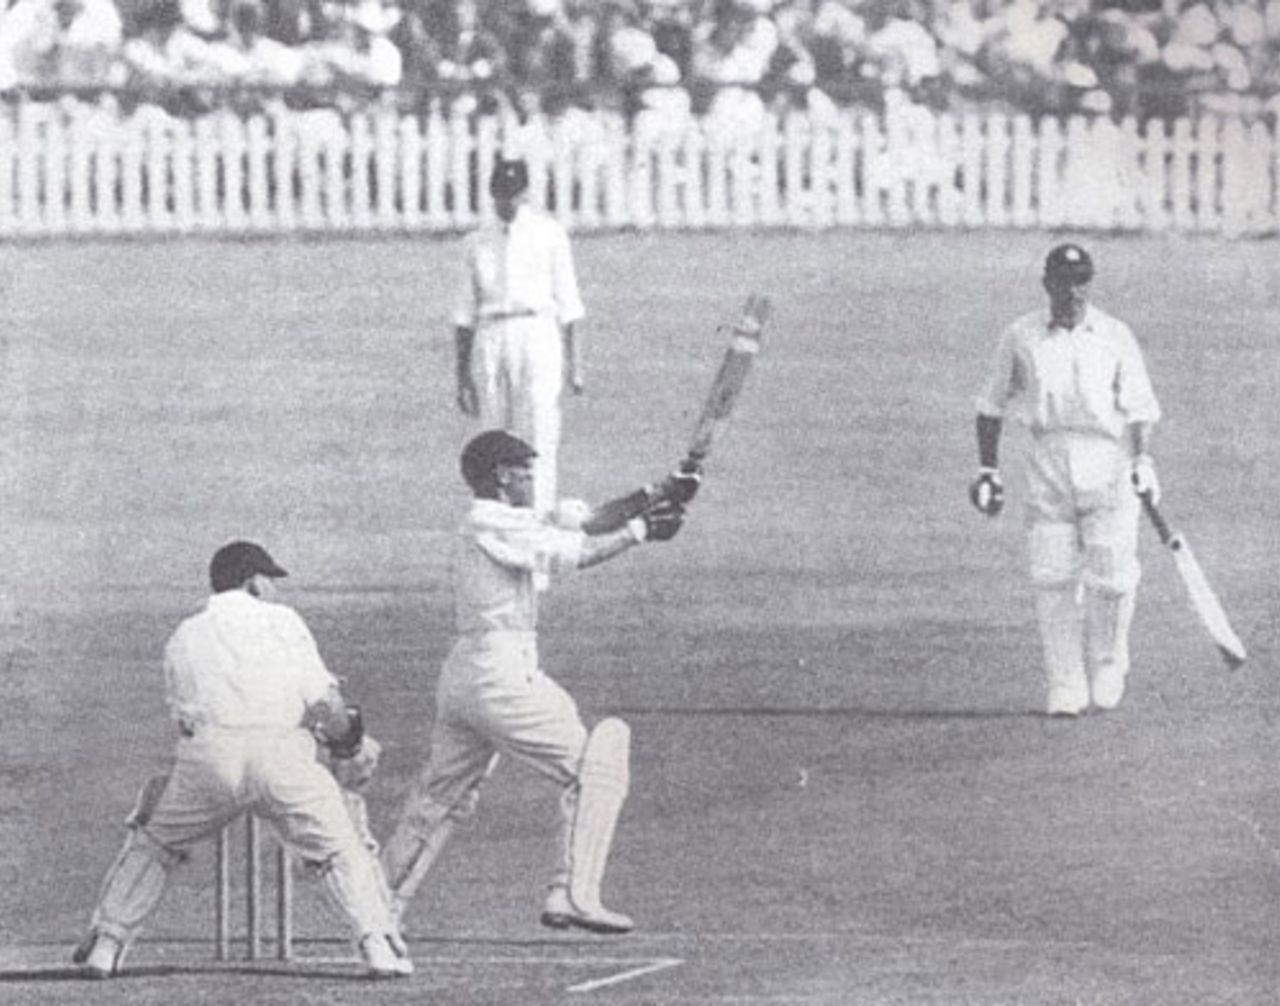 Eddie Paynter pulls through midwicket on his way to a second-innings 75, South Africa v England, 5th Test, Durban, March 13, 1939